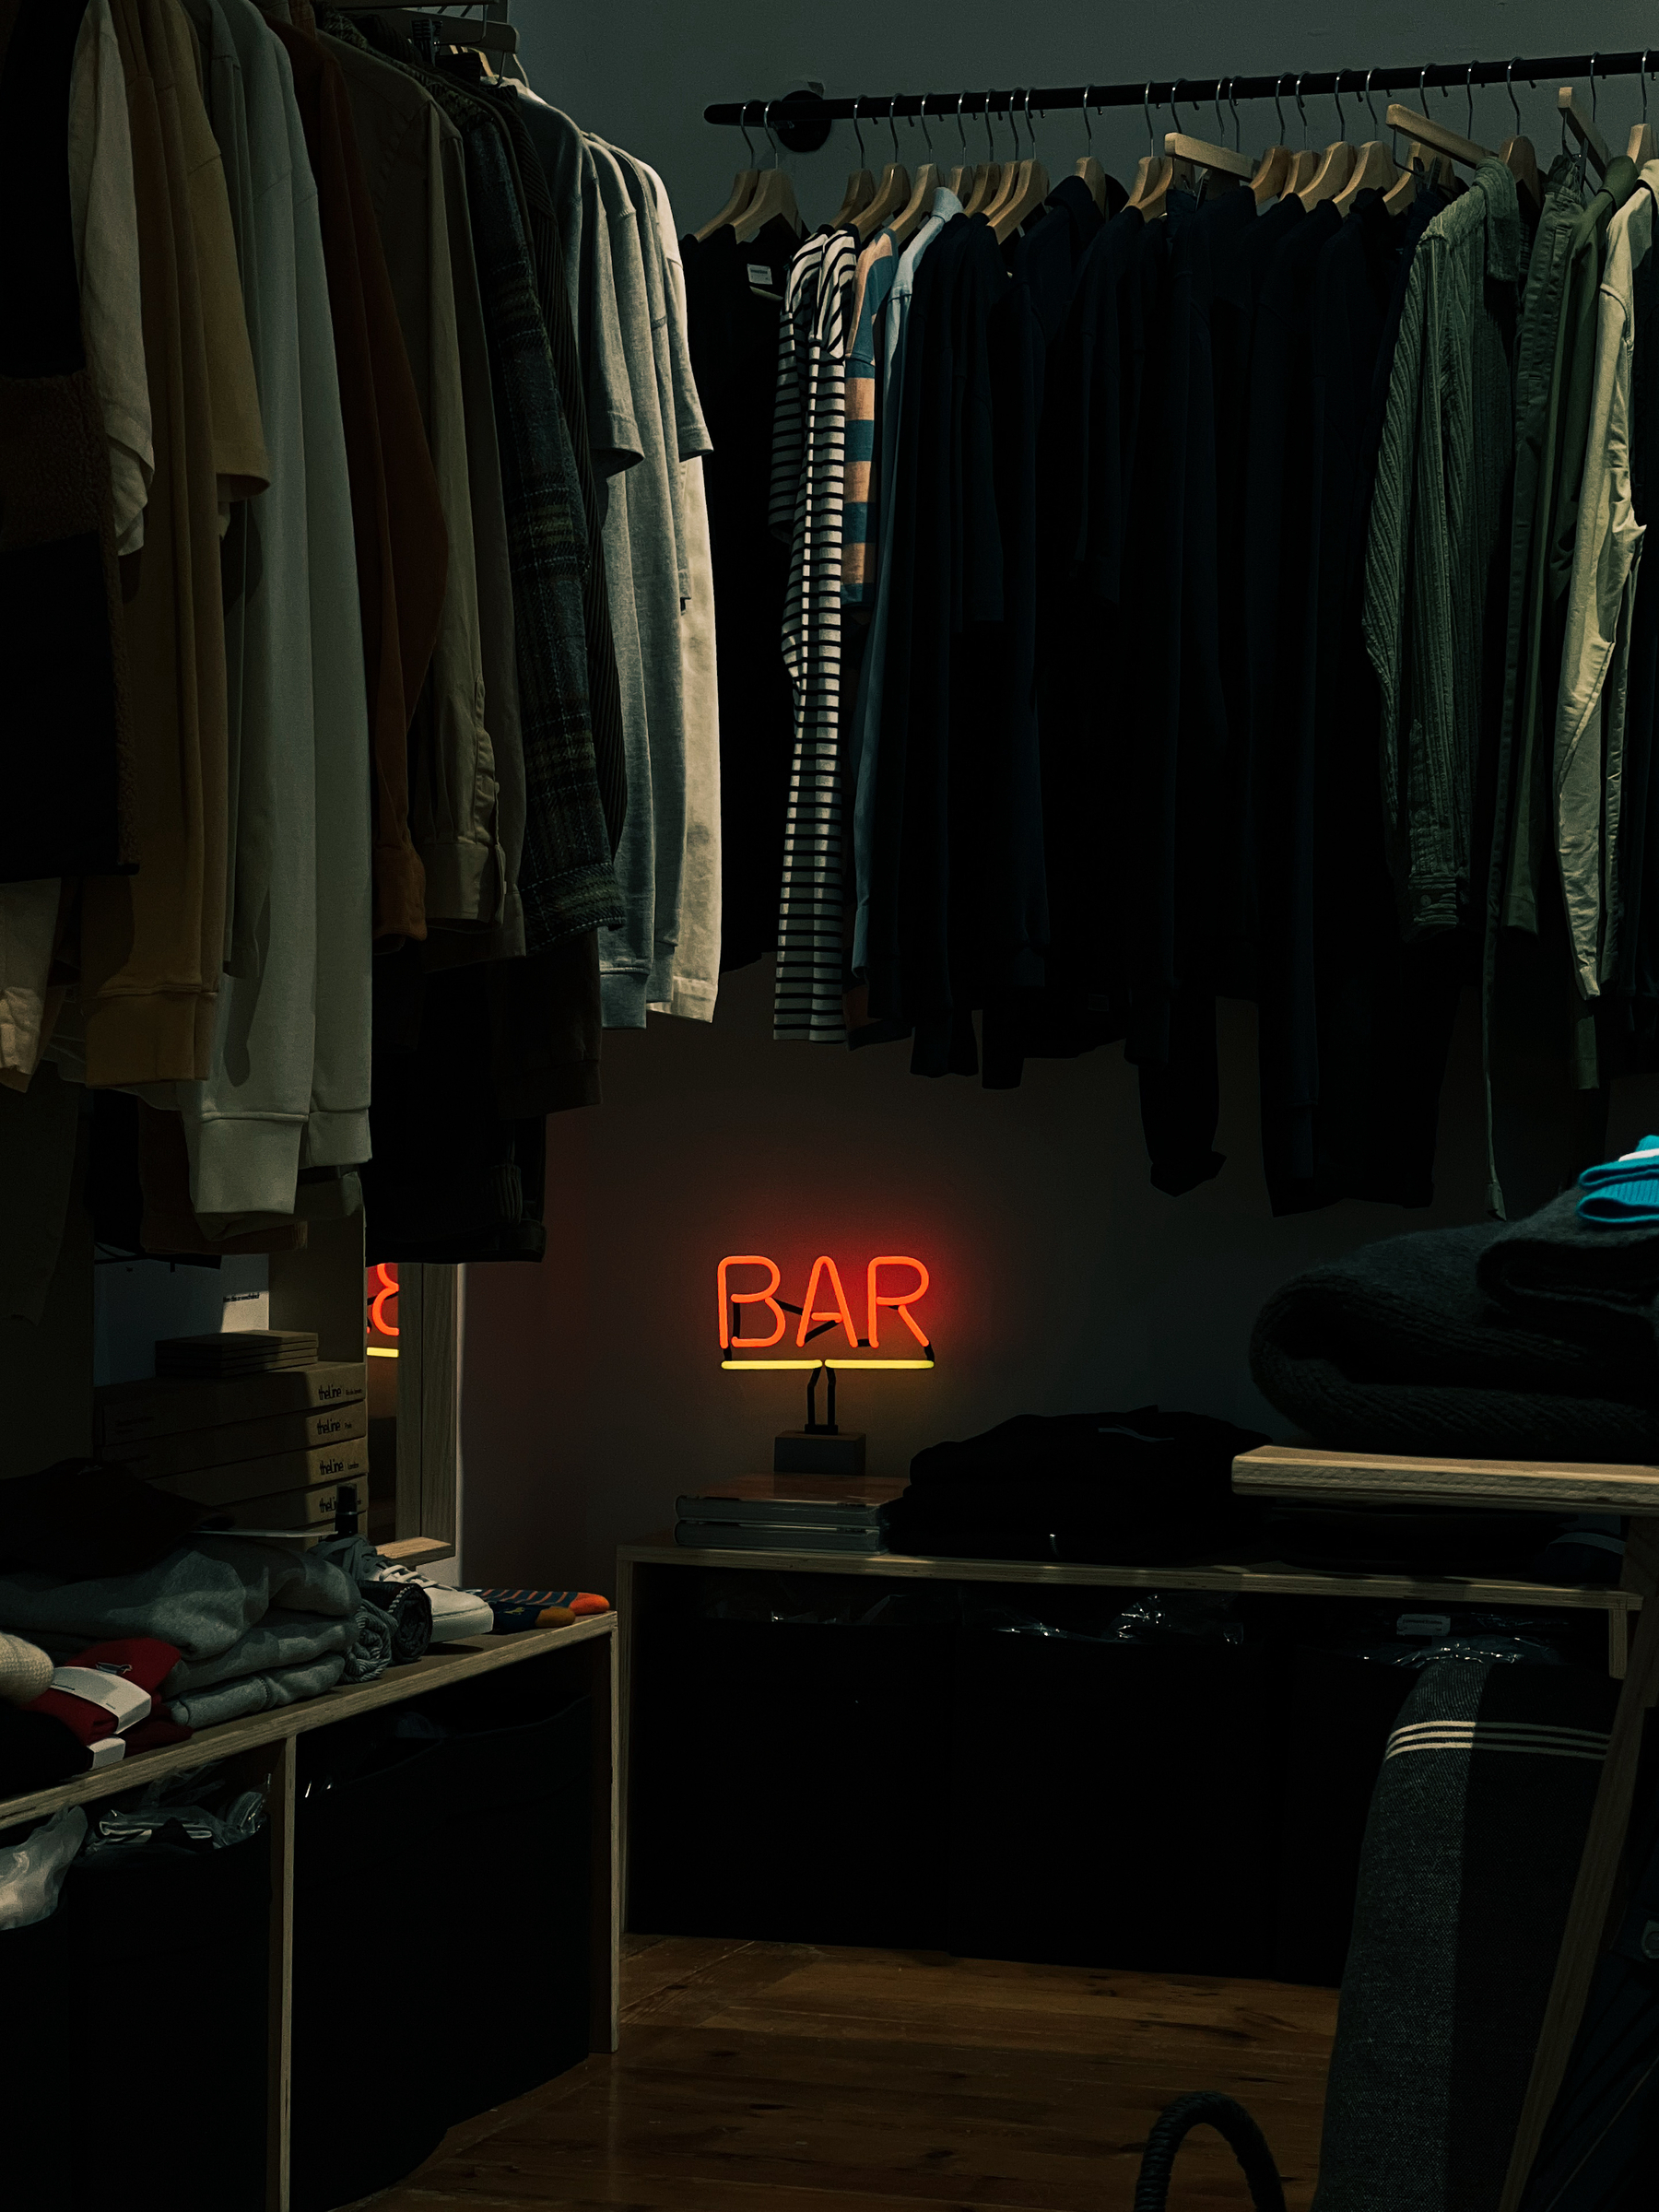 A neon sign for “Bar”, in a garment shop. 